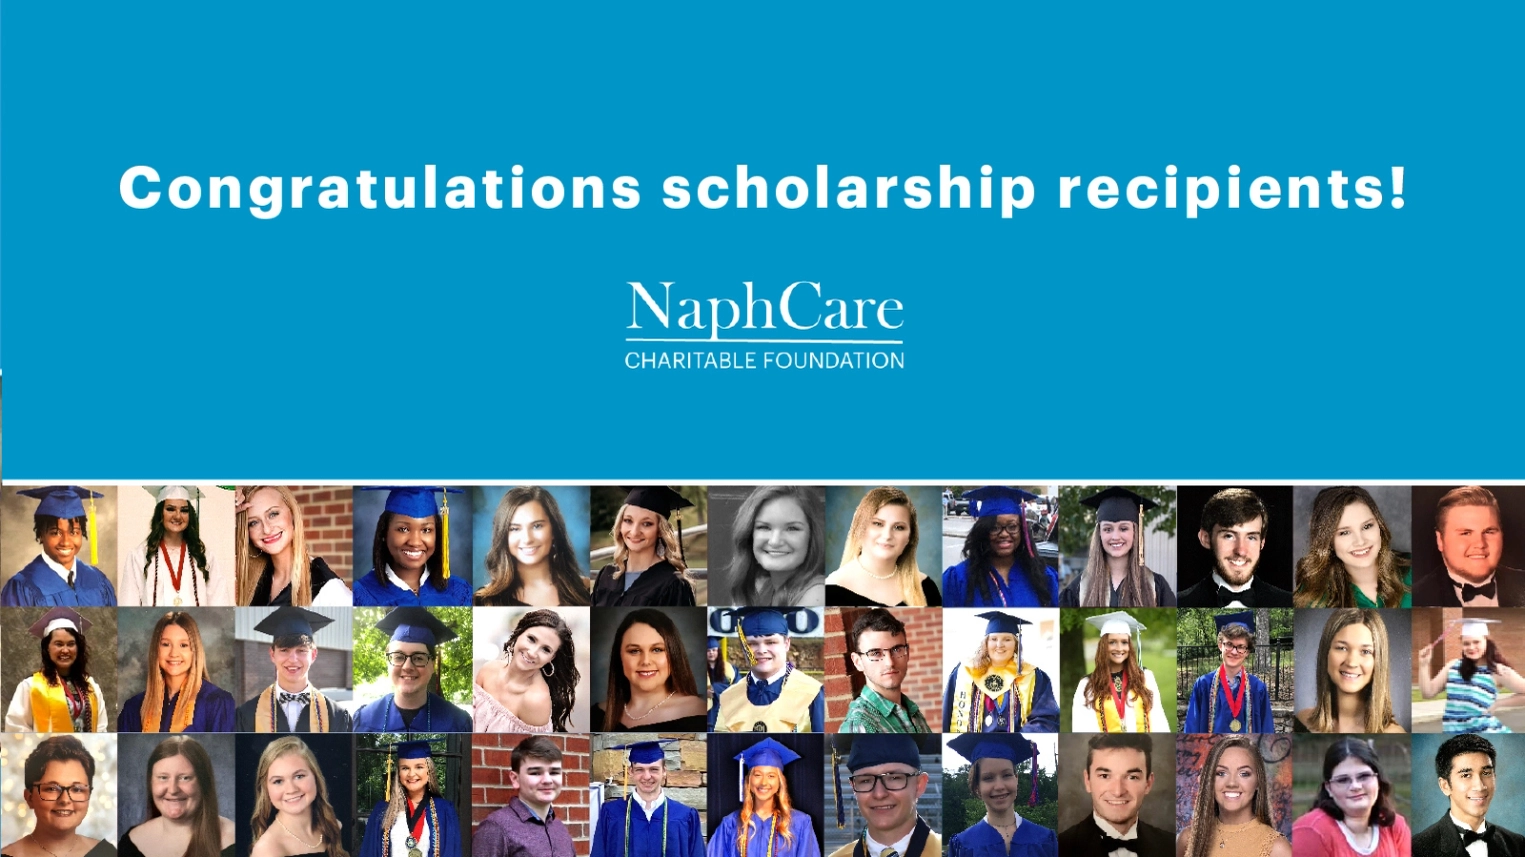 Recipients of the 2019 NaphCare Charitable Foundation Scholarship